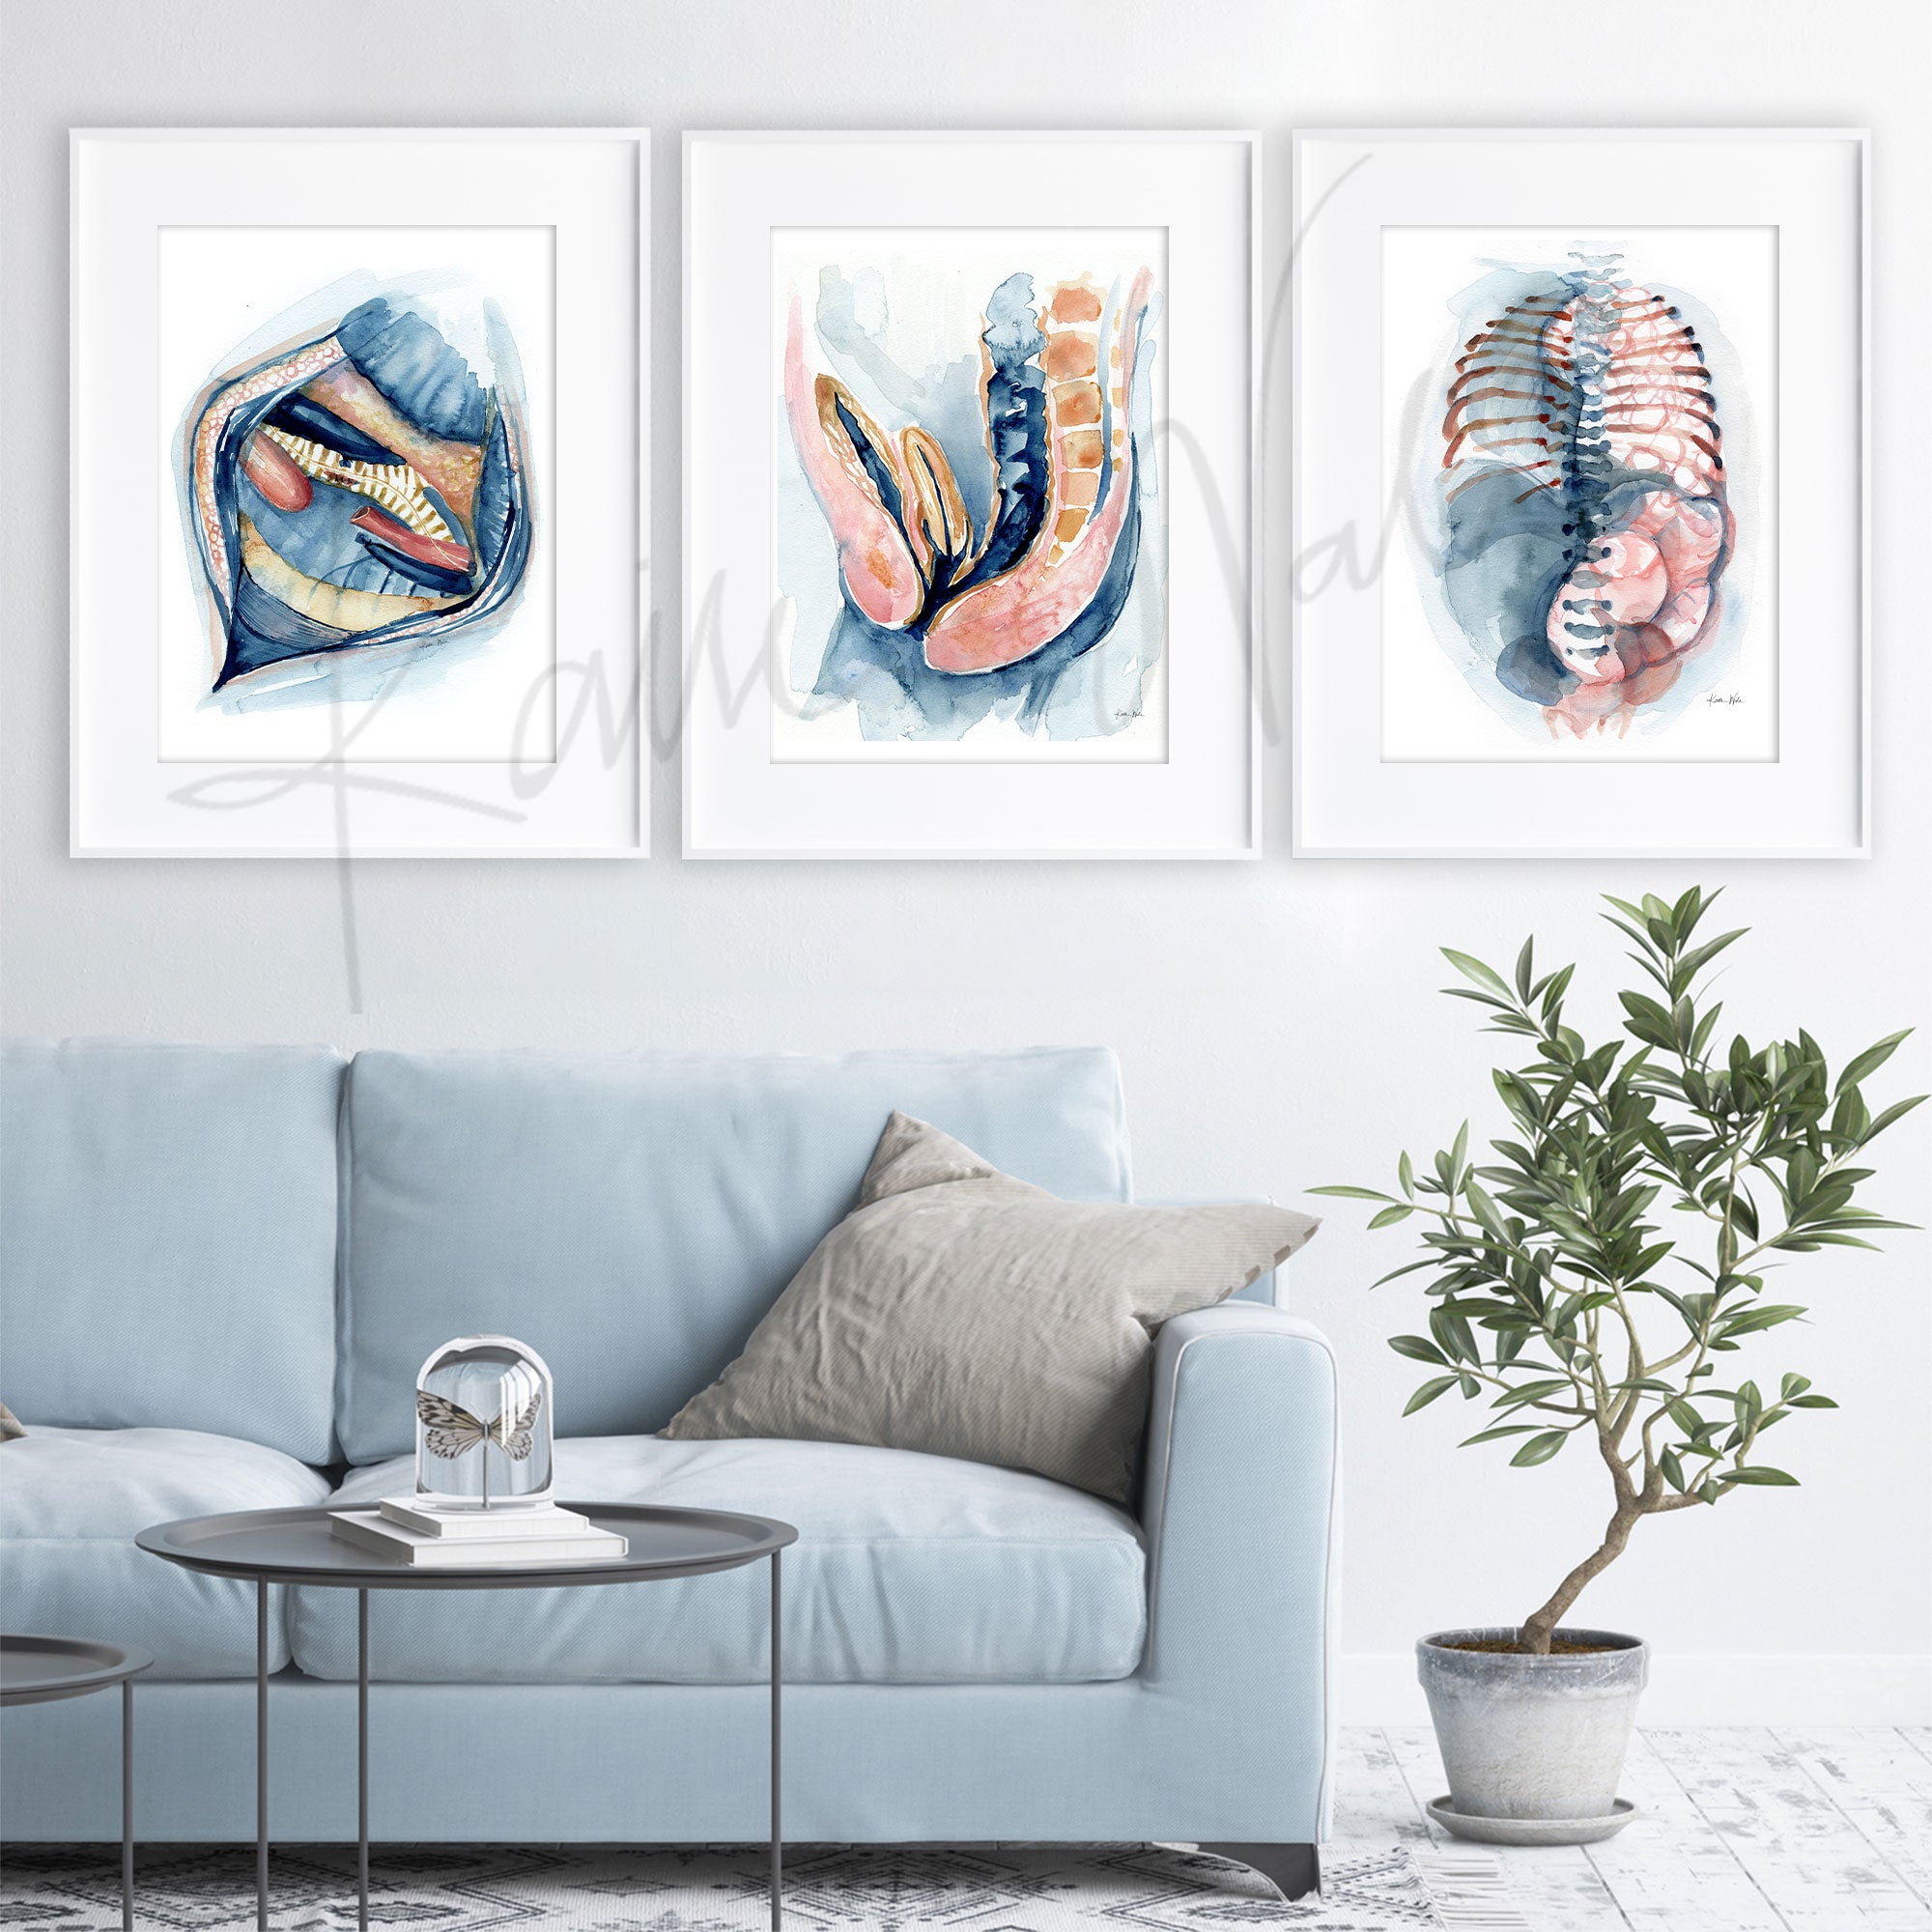 Framed watercolor painting set of three pediatric surgery paintings. The painting is hanging over a blue couch.